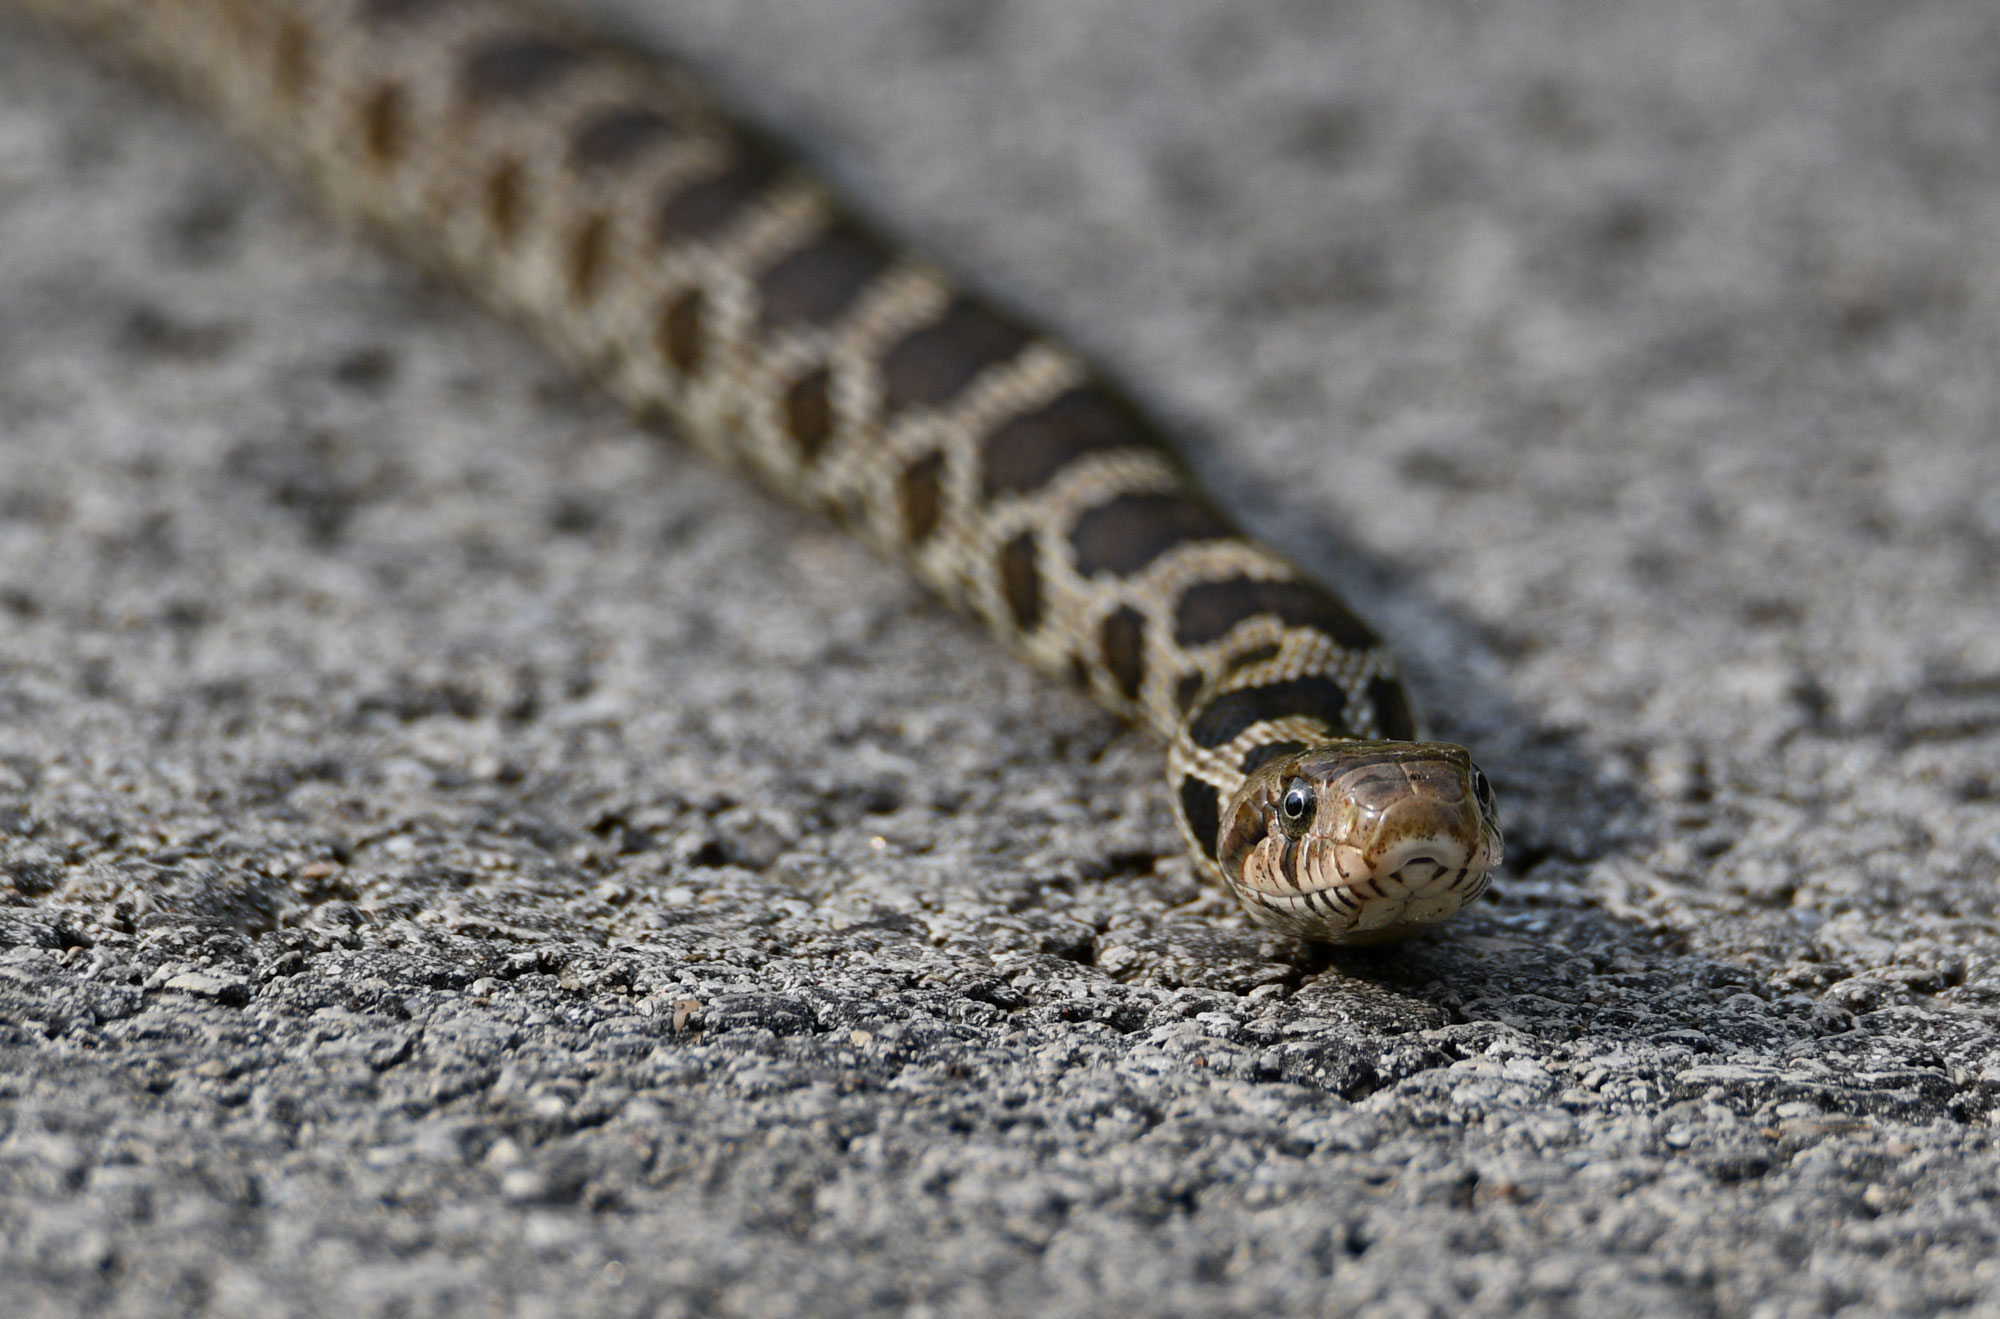 A fox snake slithering on a trail